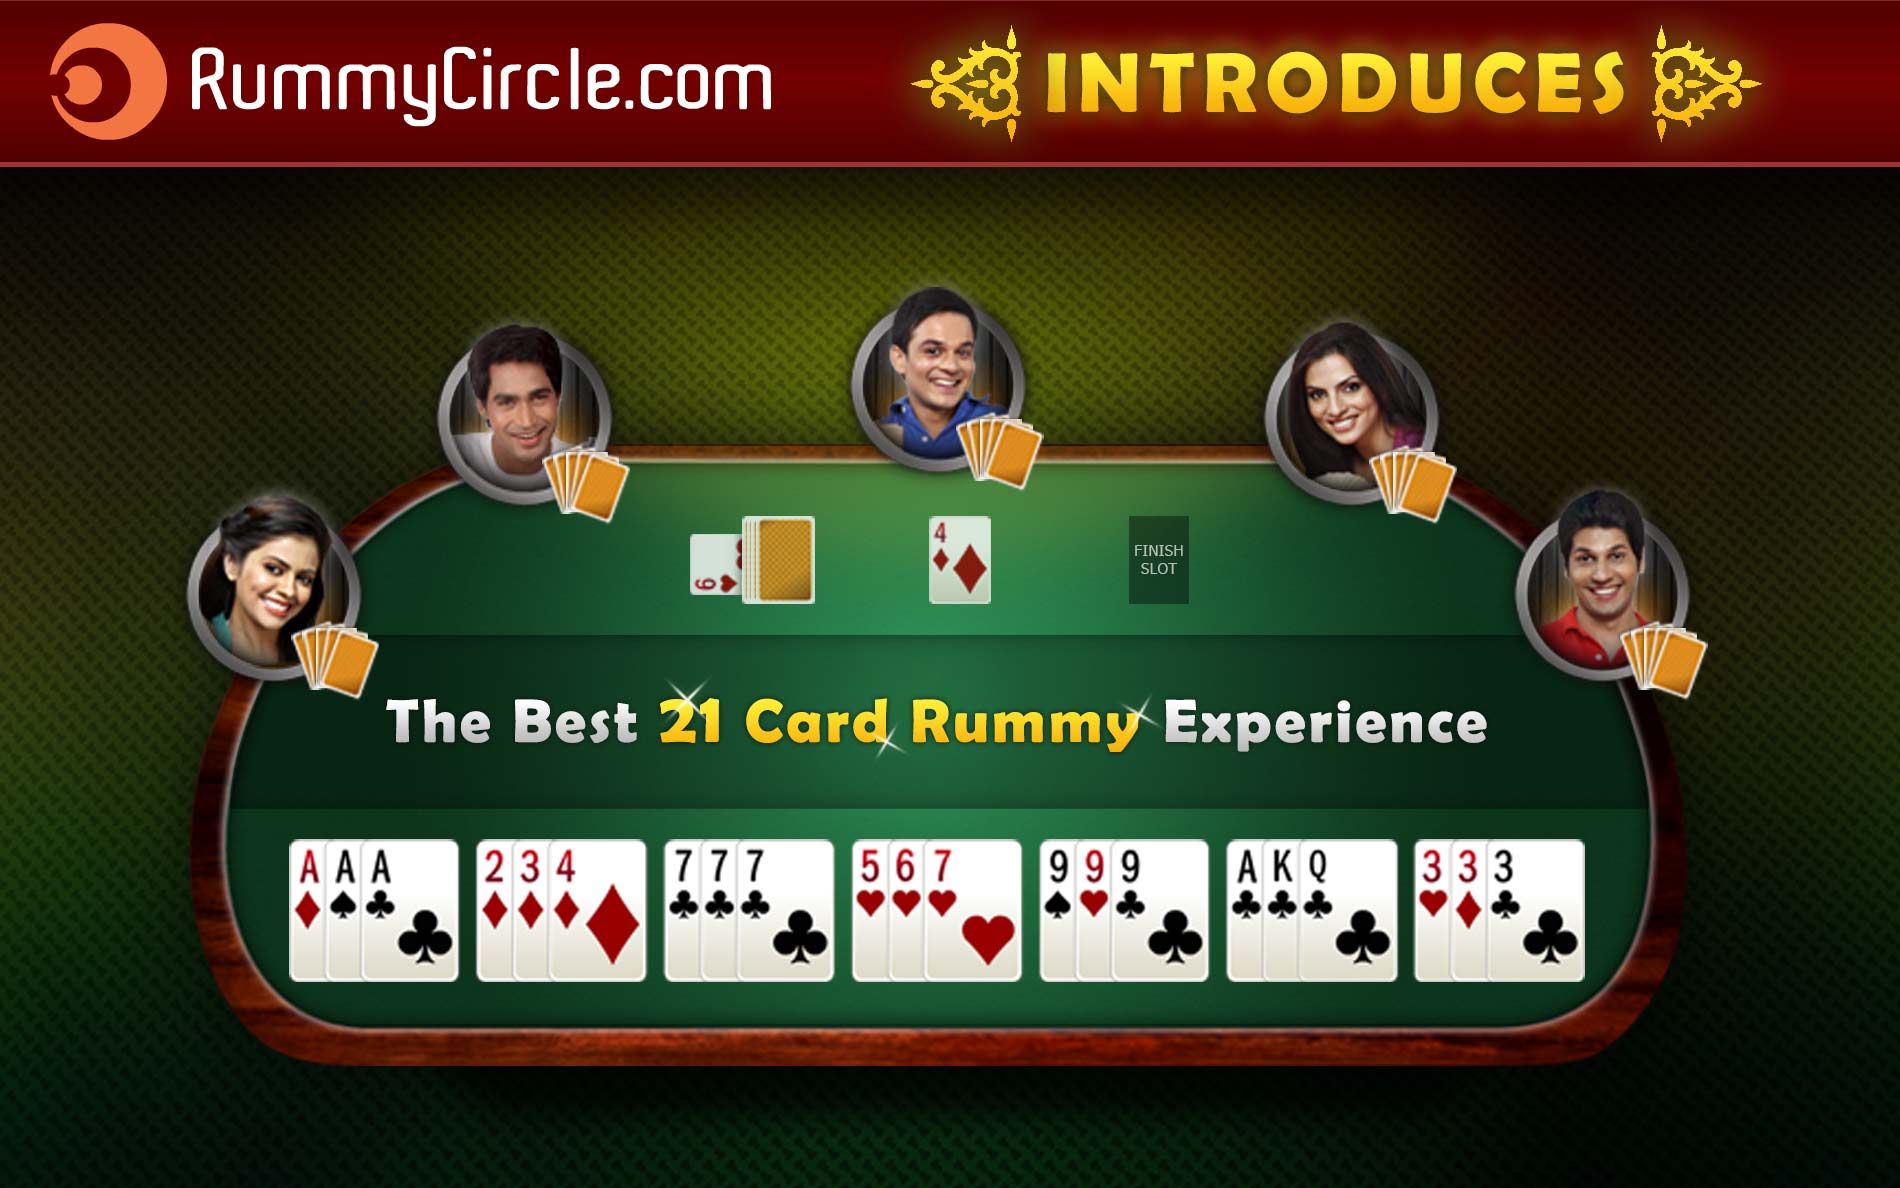 How to Play Rummy Circle